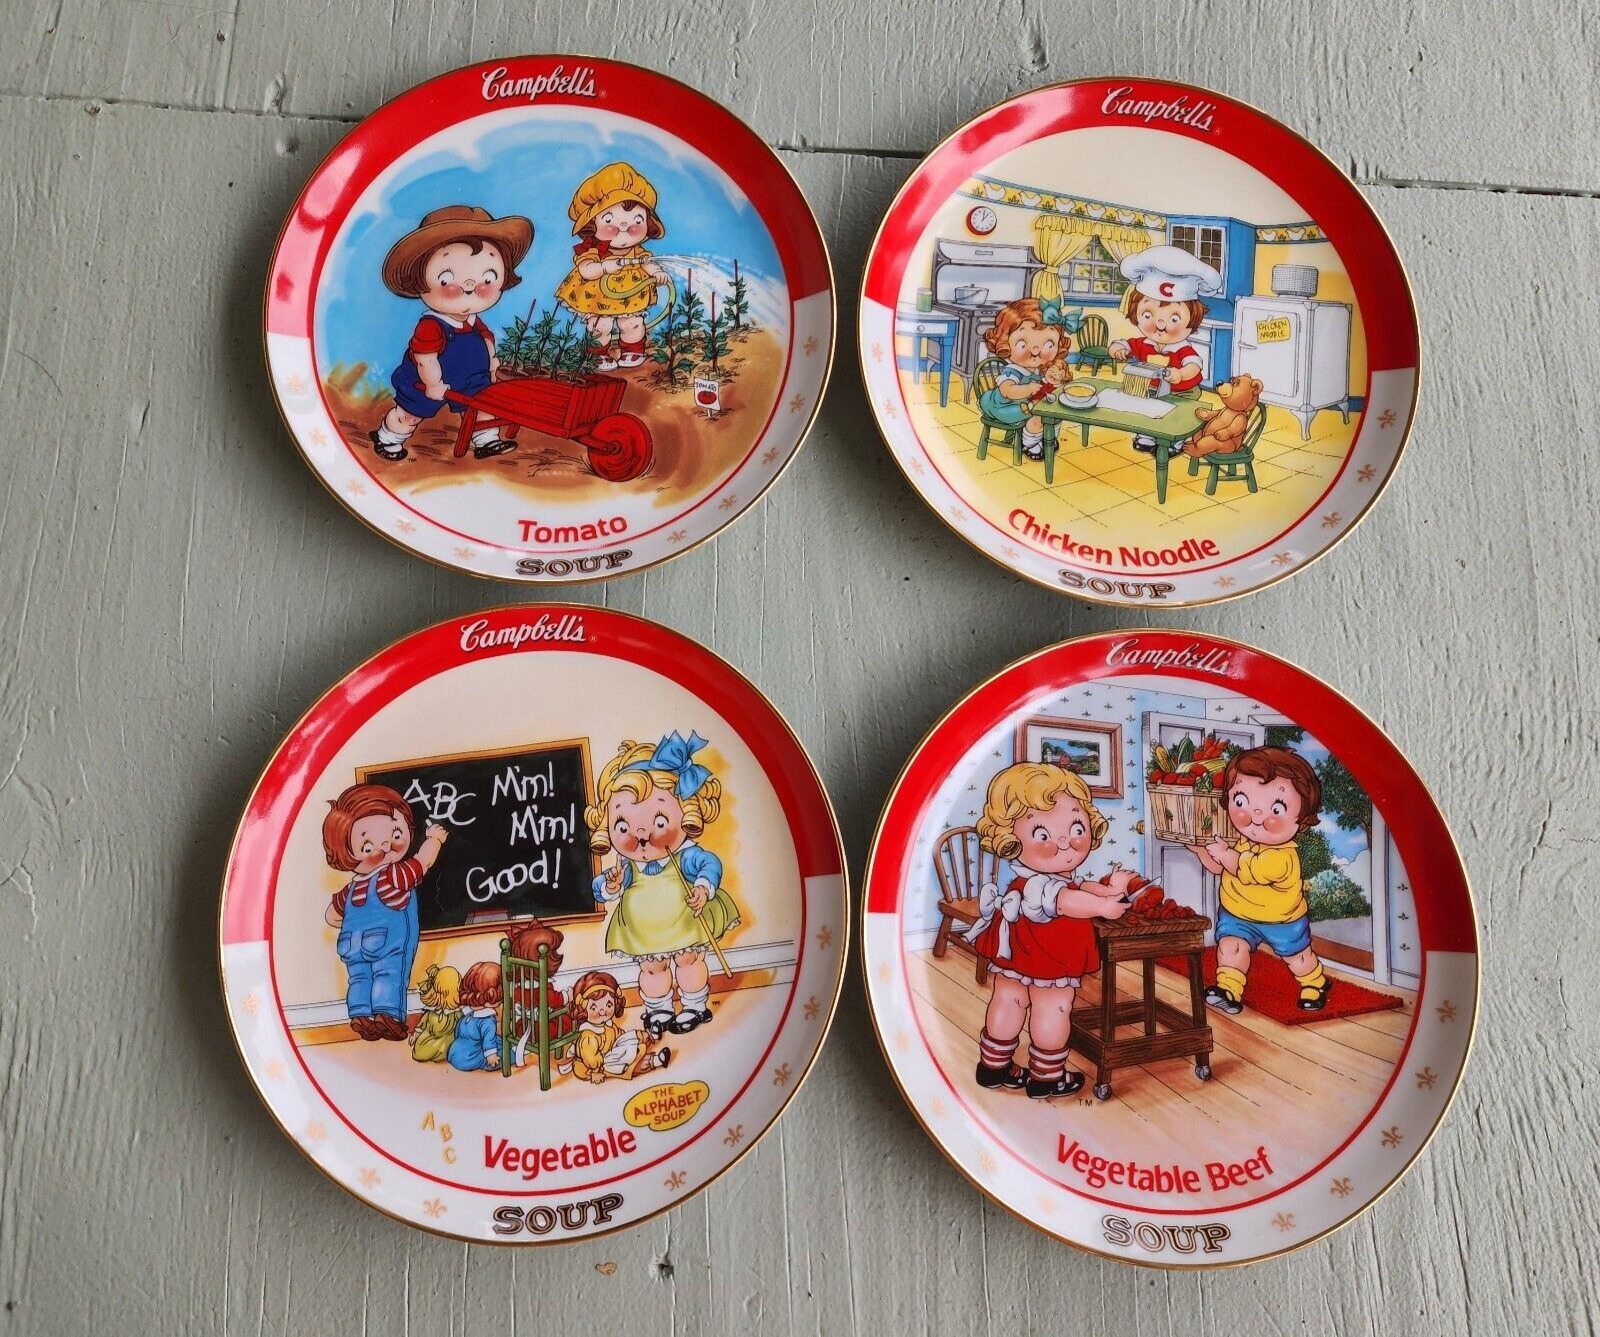 Campbell's Soup Plates With the Campbell's Children